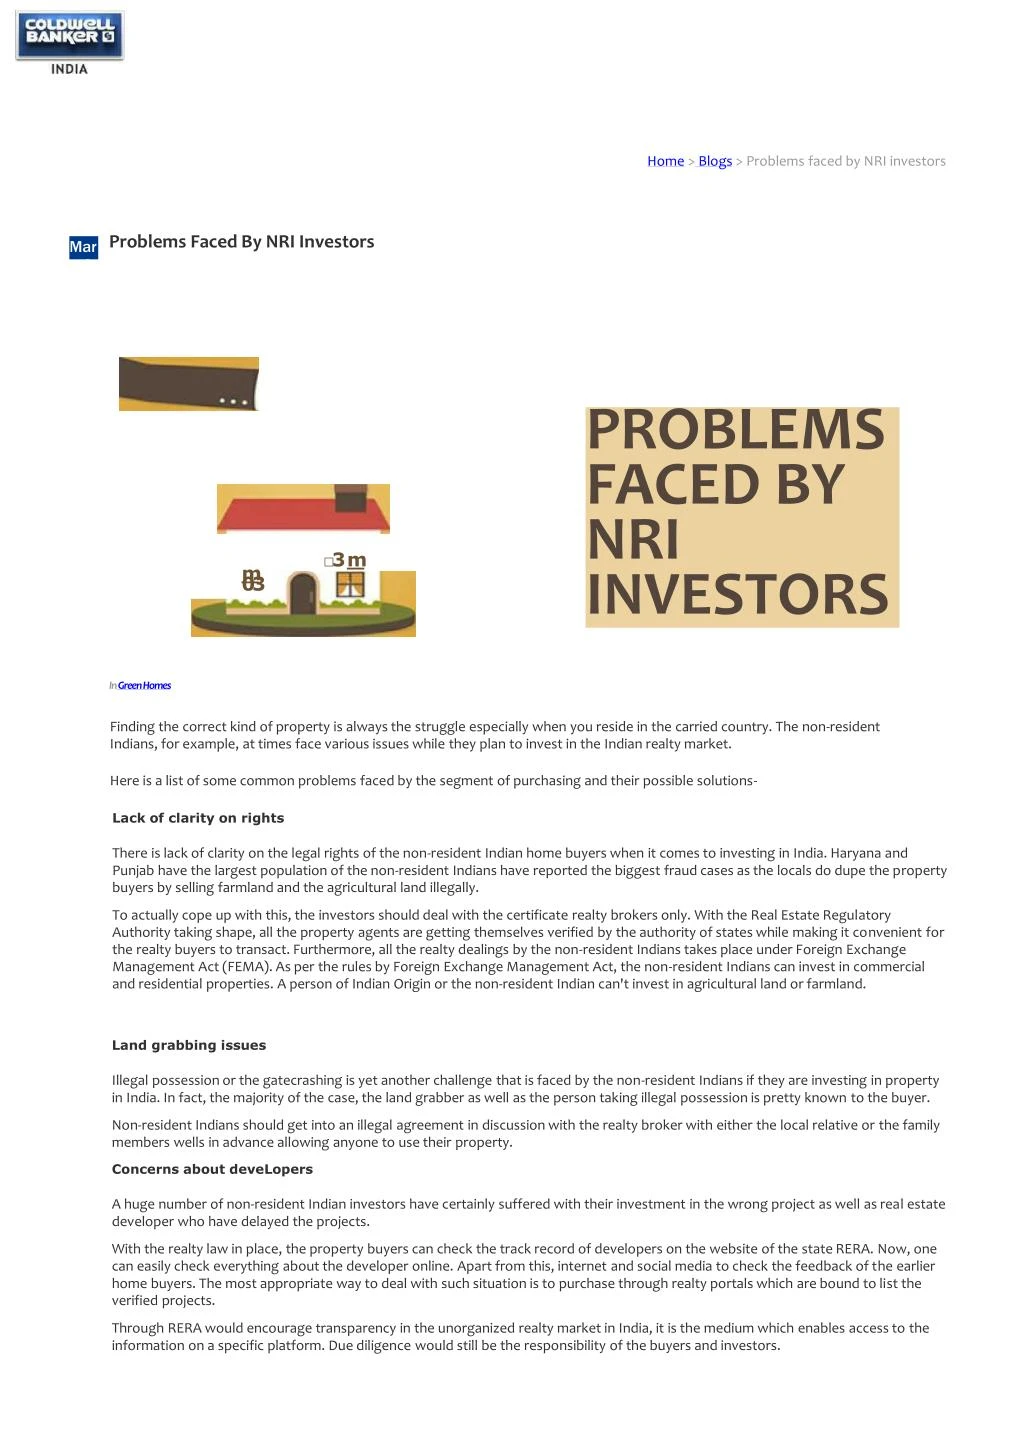 home blogs problems faced by nri investors